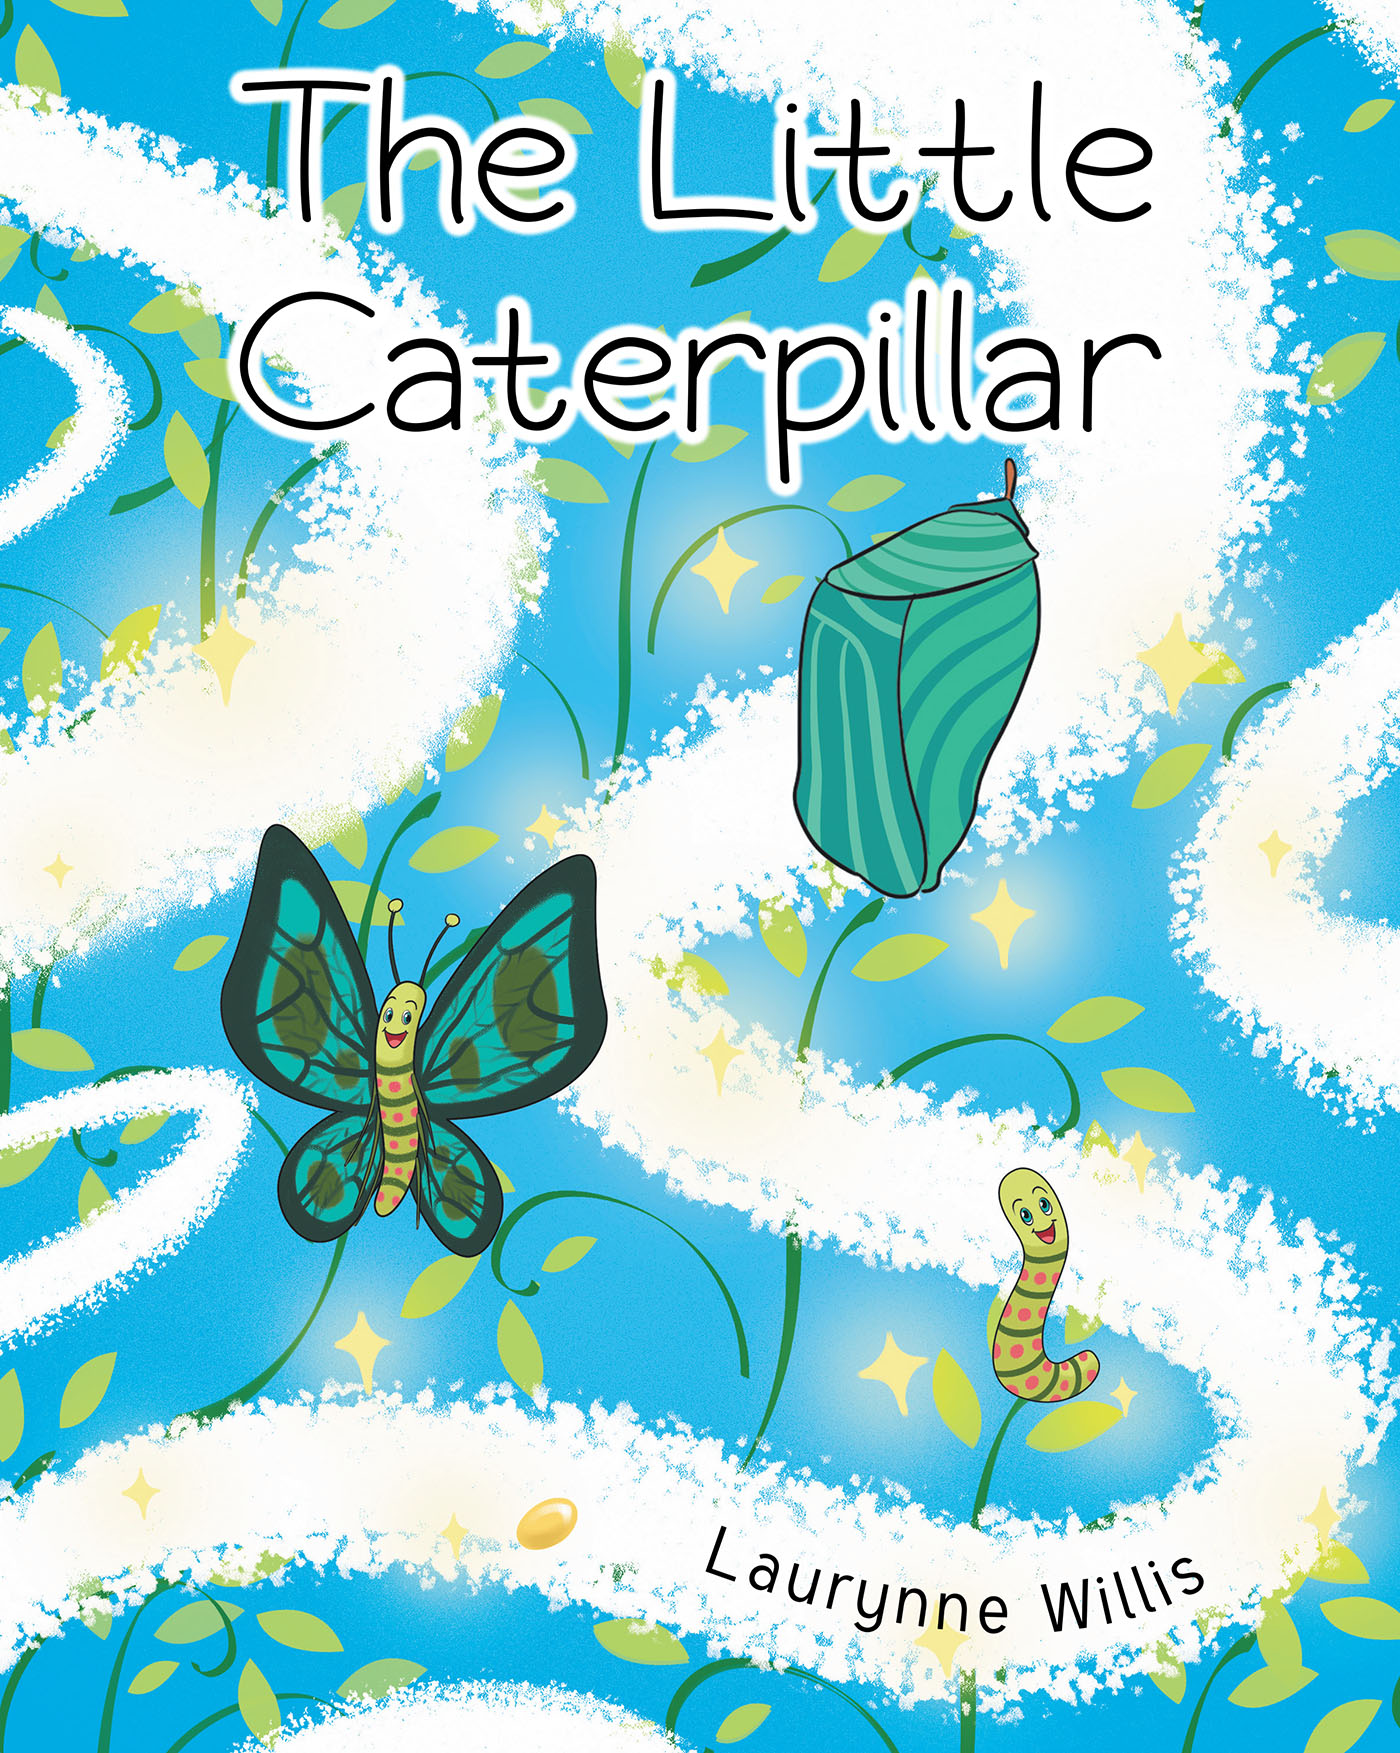 Author Laurynne Willis’s New Book, "The Little Caterpillar," Follows the Adventures of a Caterpillar Who Longs to be a Butterfly Like the Ones He Always Sees Flying